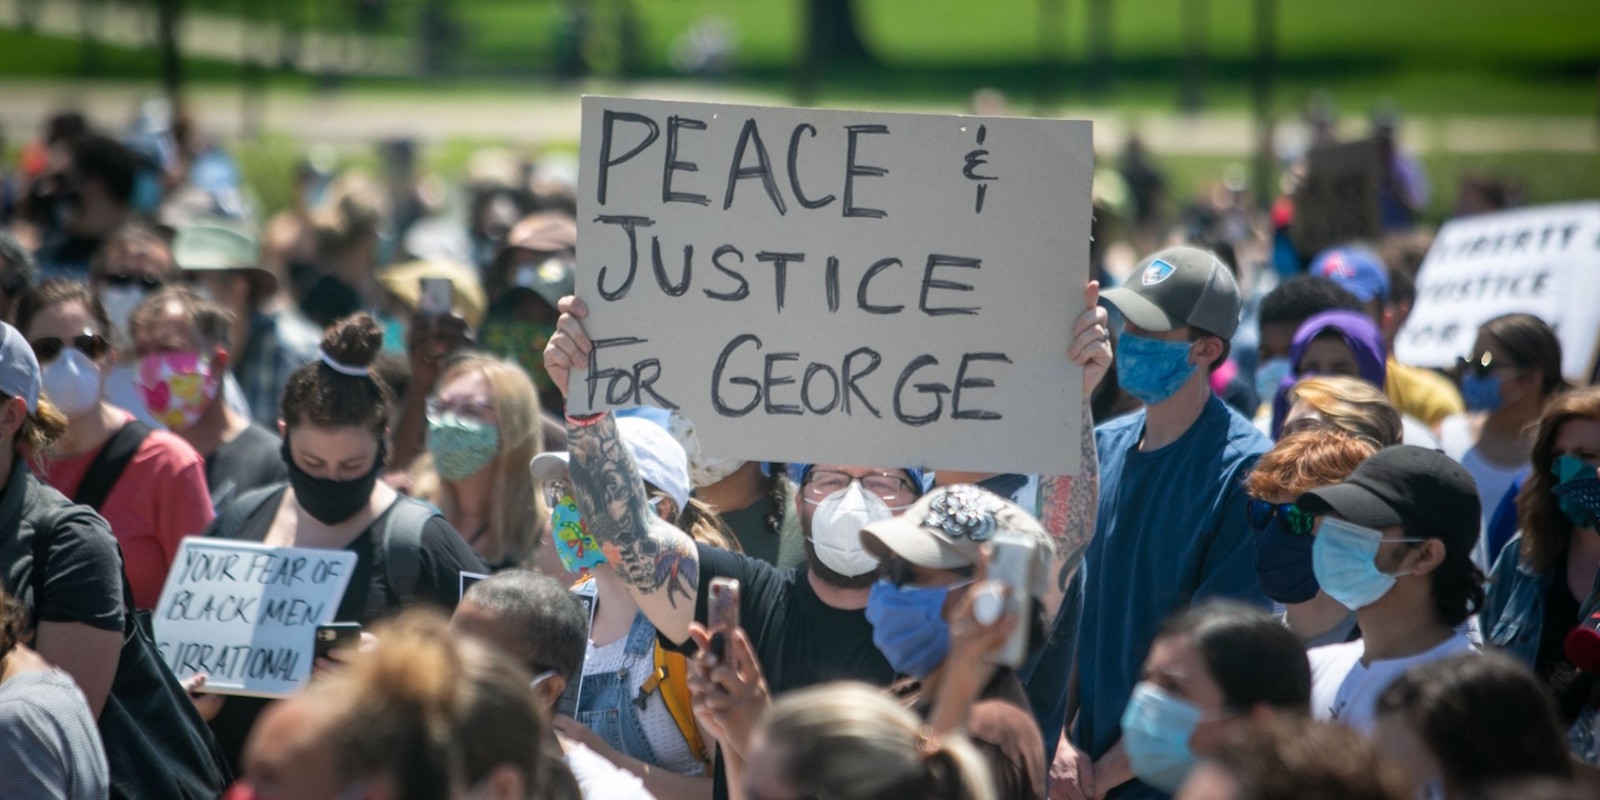 Peace and Justice for George sign at protest